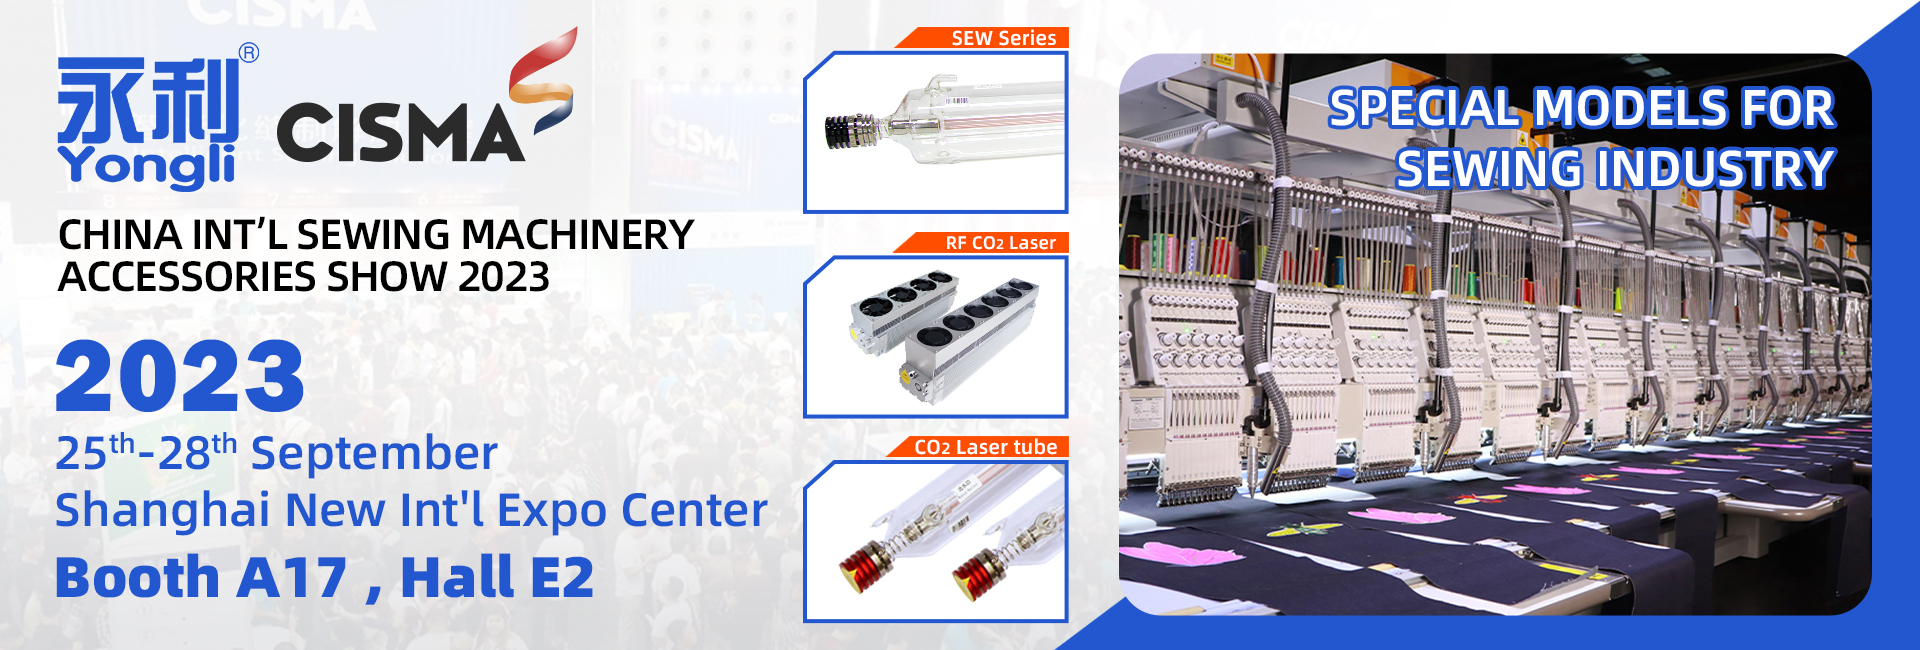 Yongli Laser CHINA INTL SEWING MACHINERY& ACCESSORIES SHOW 2023